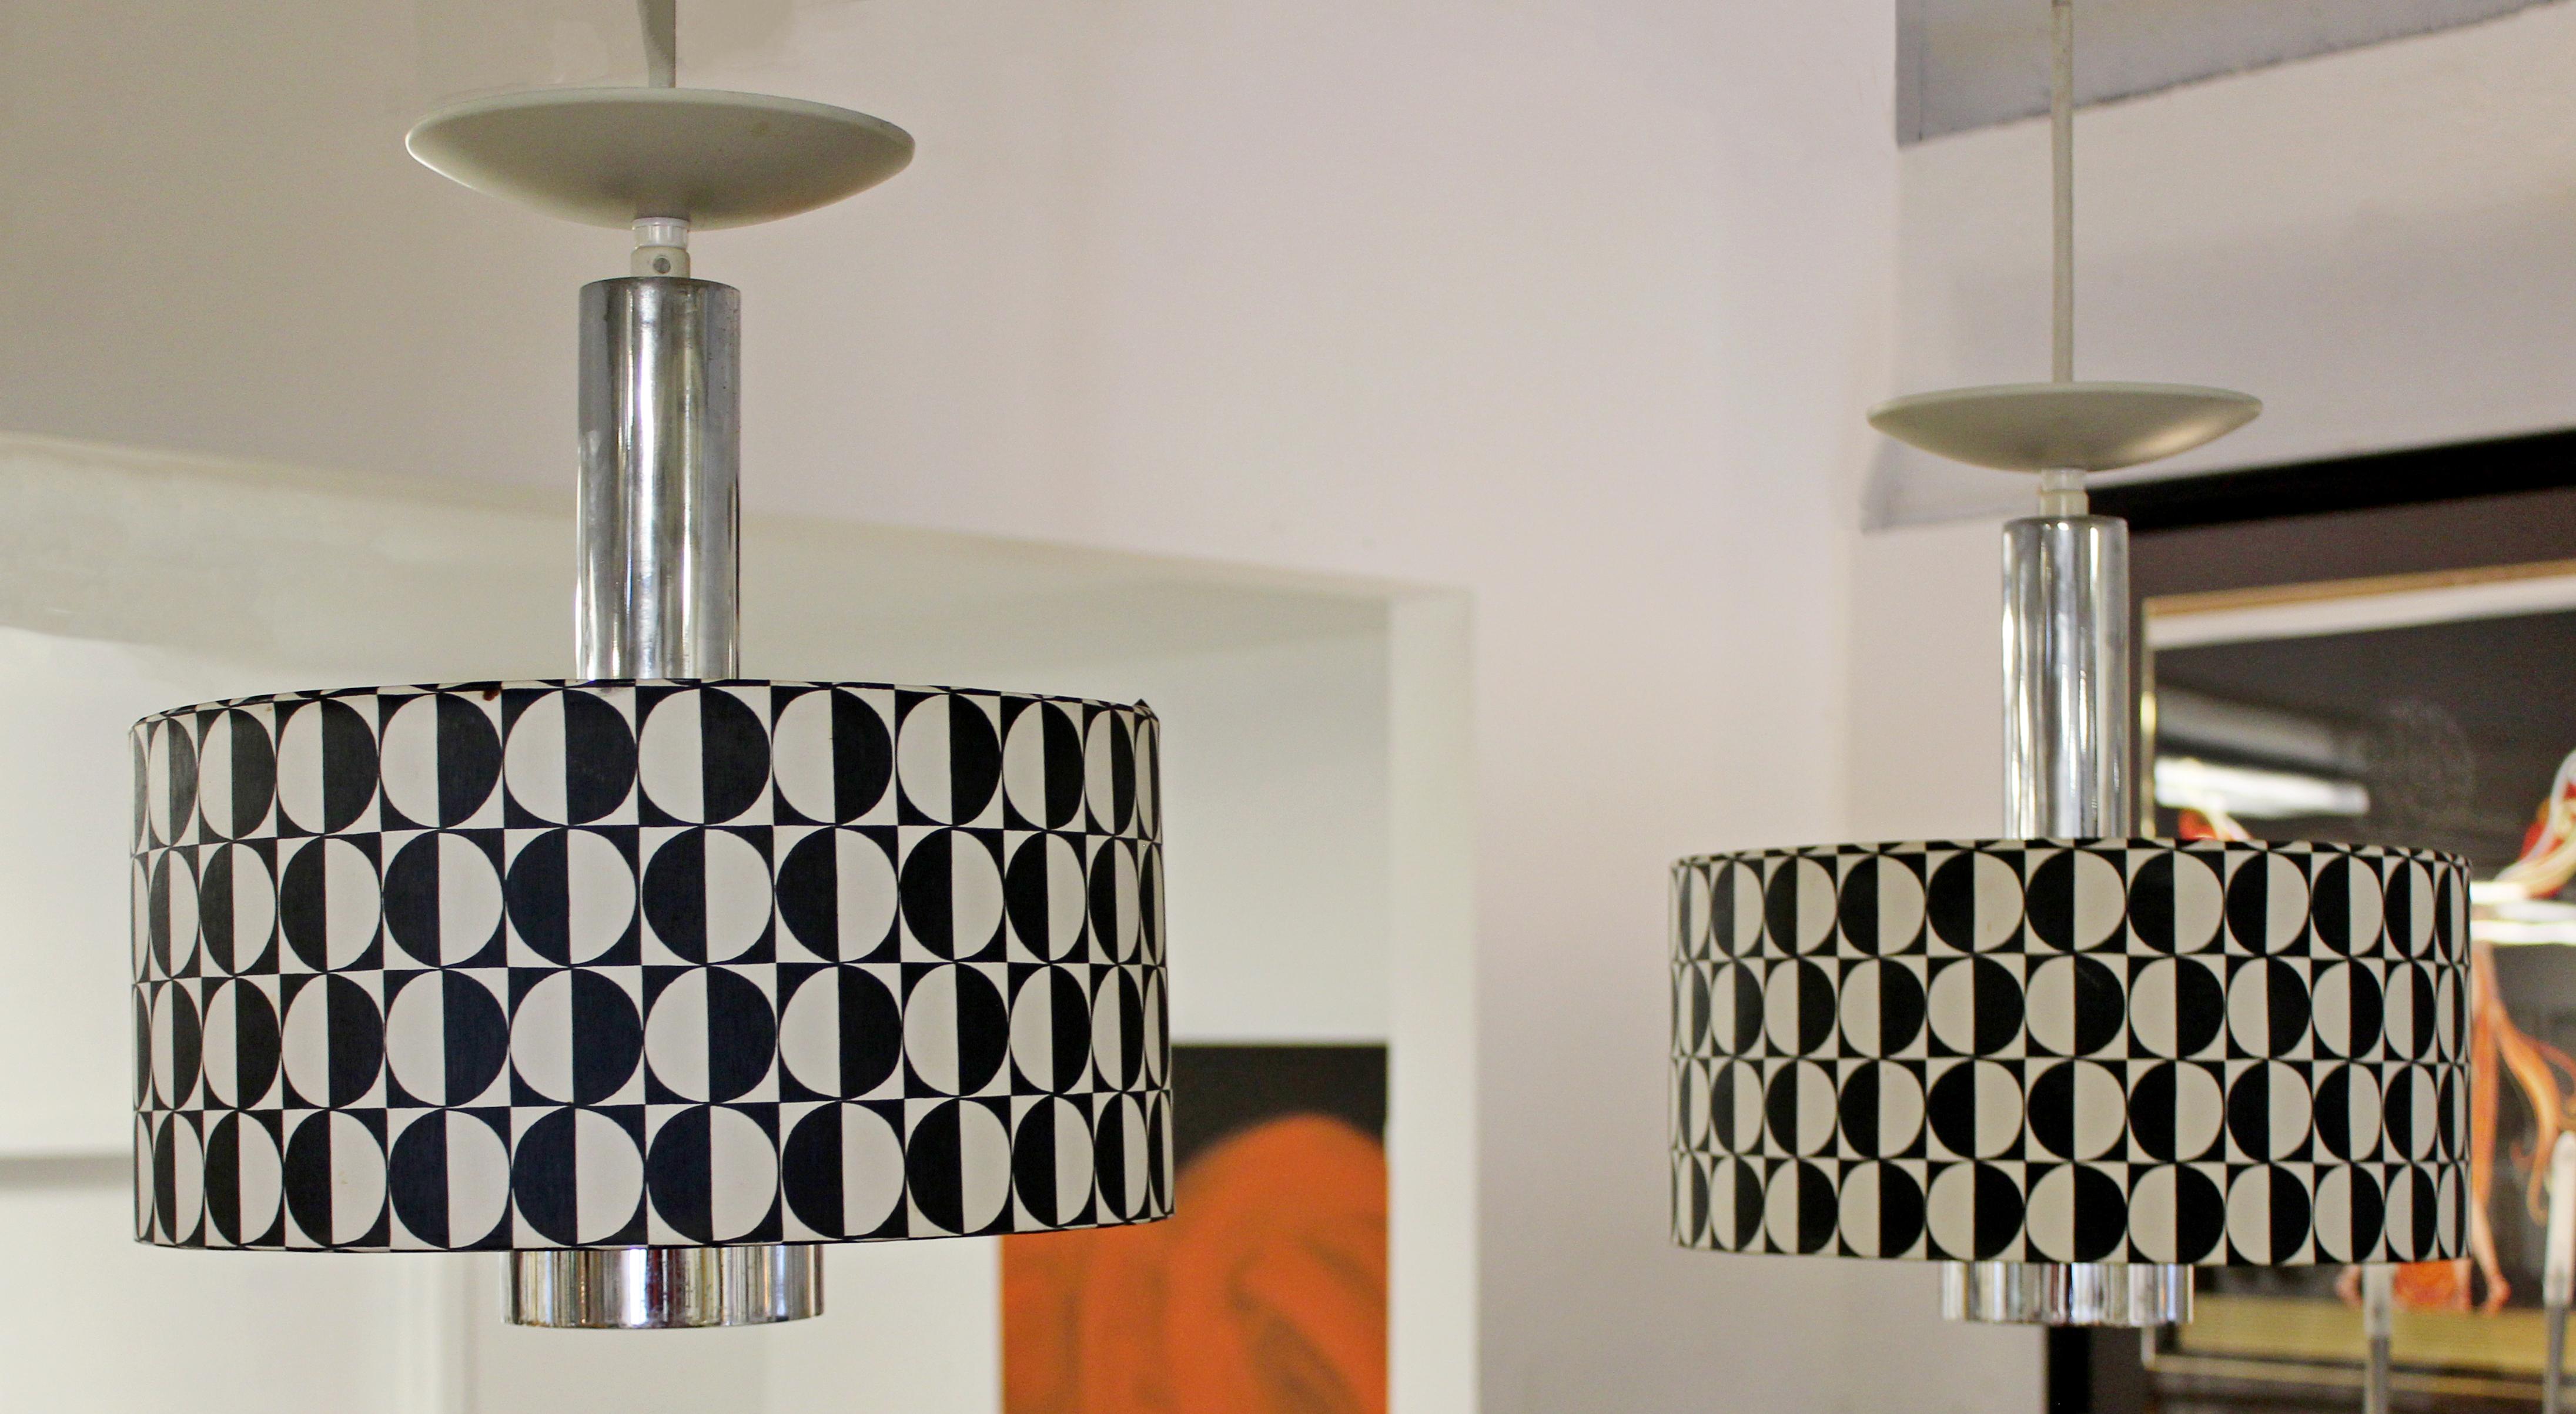 For your consideration is a rare pair of Italian, Lightolier, hanging light fixtures, circa 1960s. Acrylic and chrome globes with black and white shades. In very good condition. The dimensions are 12